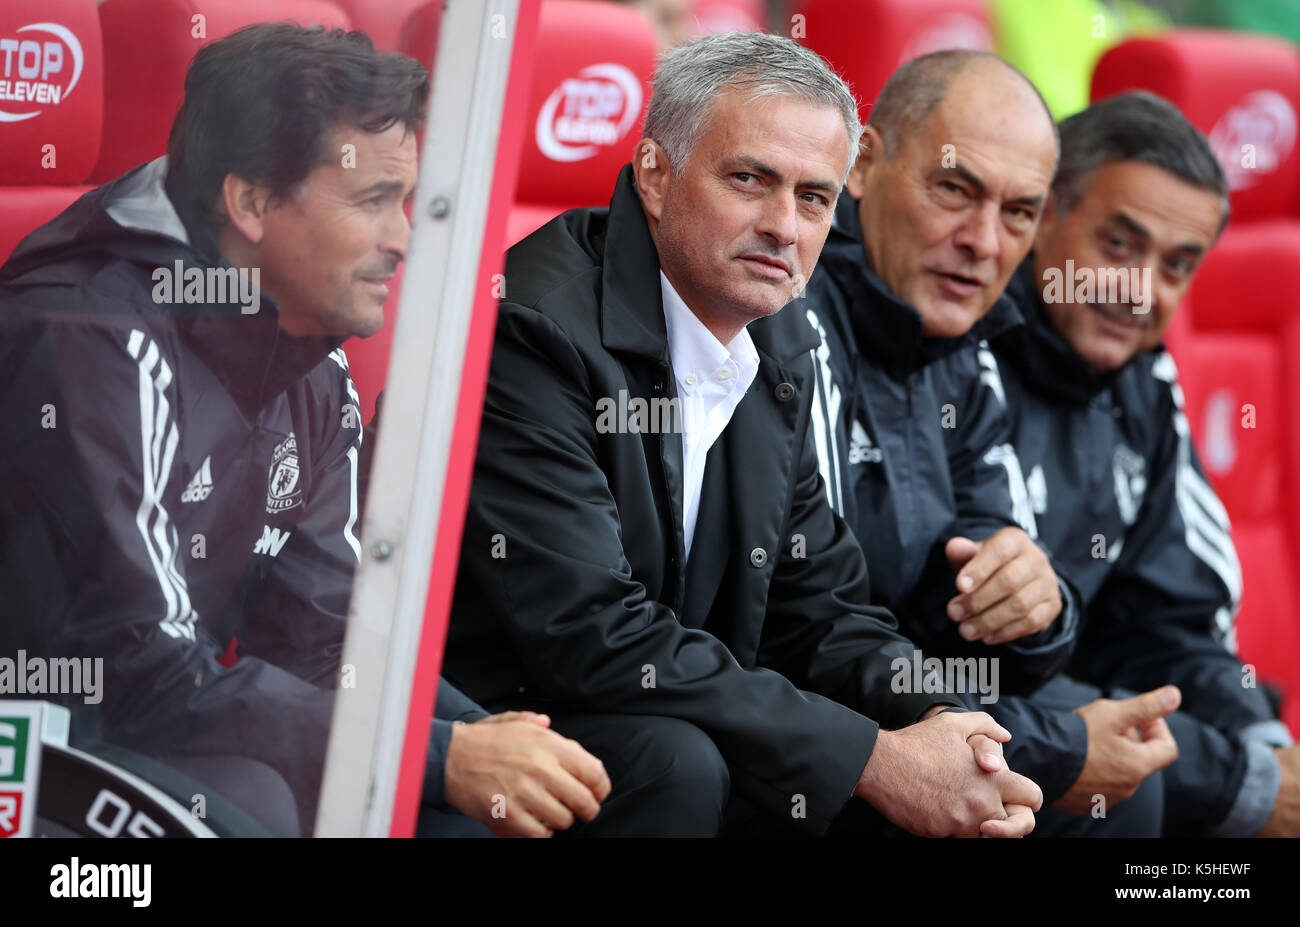 Manchester United manager Jose Mourinho during the Premier League match at the bet365 Stadium, Stoke. PRESS ASSOCIATION Photo. Picture date: Saturday September 9, 2017. See PA story SOCCER Stoke. Photo credit should read: Nick Potts/PA Wire. RESTRICTIONS: No use with unauthorised audio, video, data, fixture lists, club/league logos or 'live' services. Online in-match use limited to 75 images, no video emulation. No use in betting, games or single club/league/player publications. Stock Photo